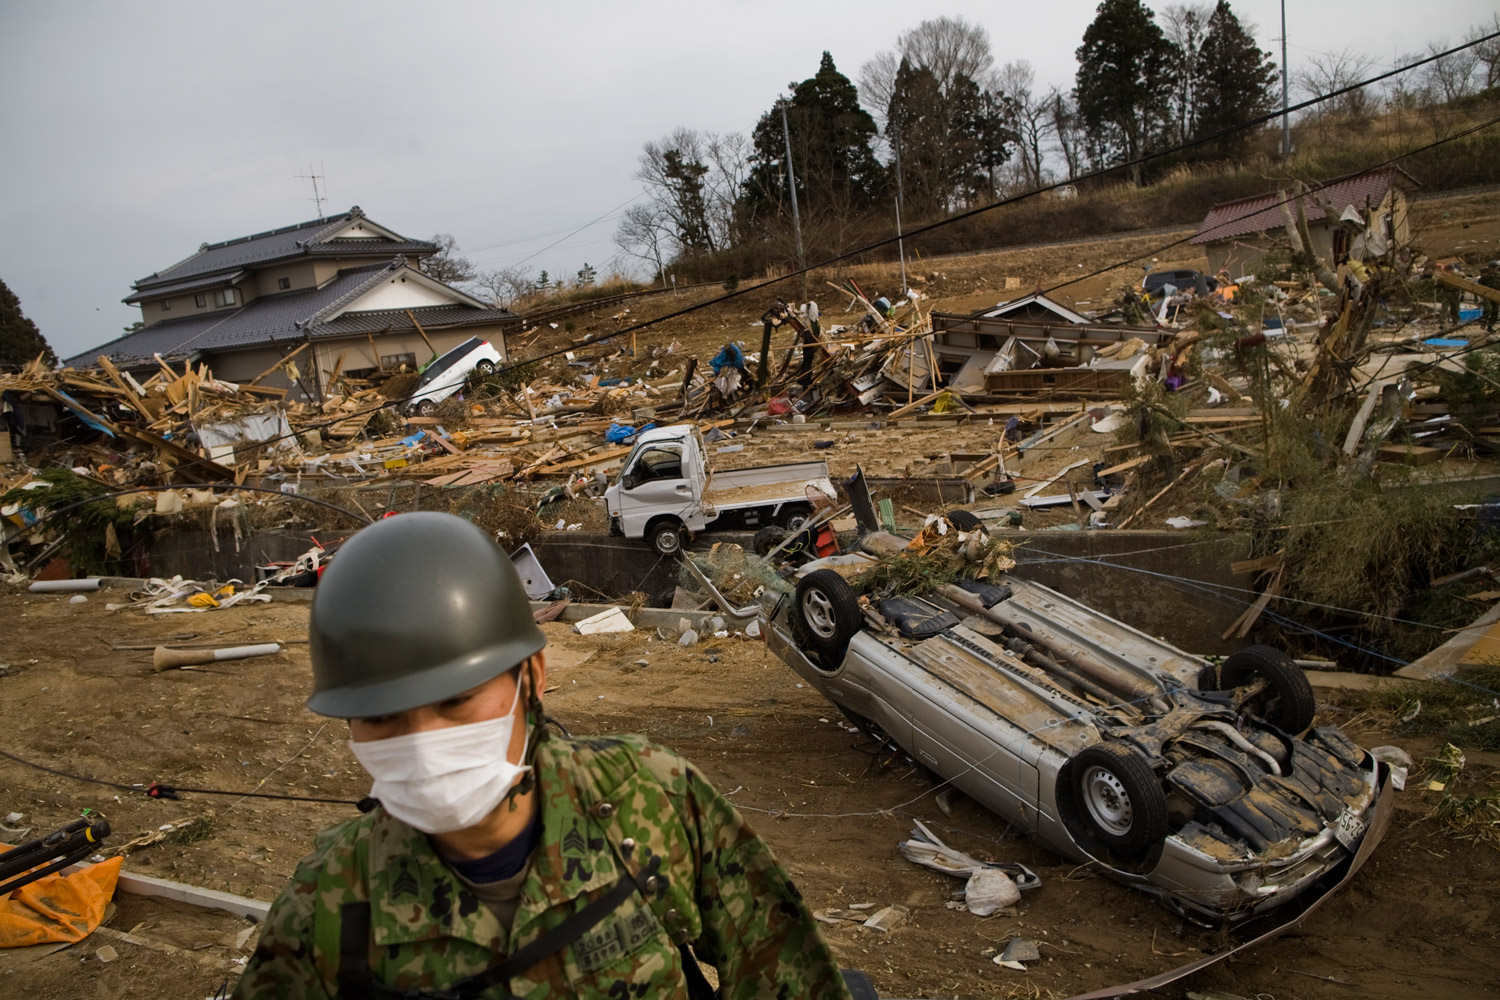 A member of Japan's Self-Defense Forces searches for survivors on March 14, 2011